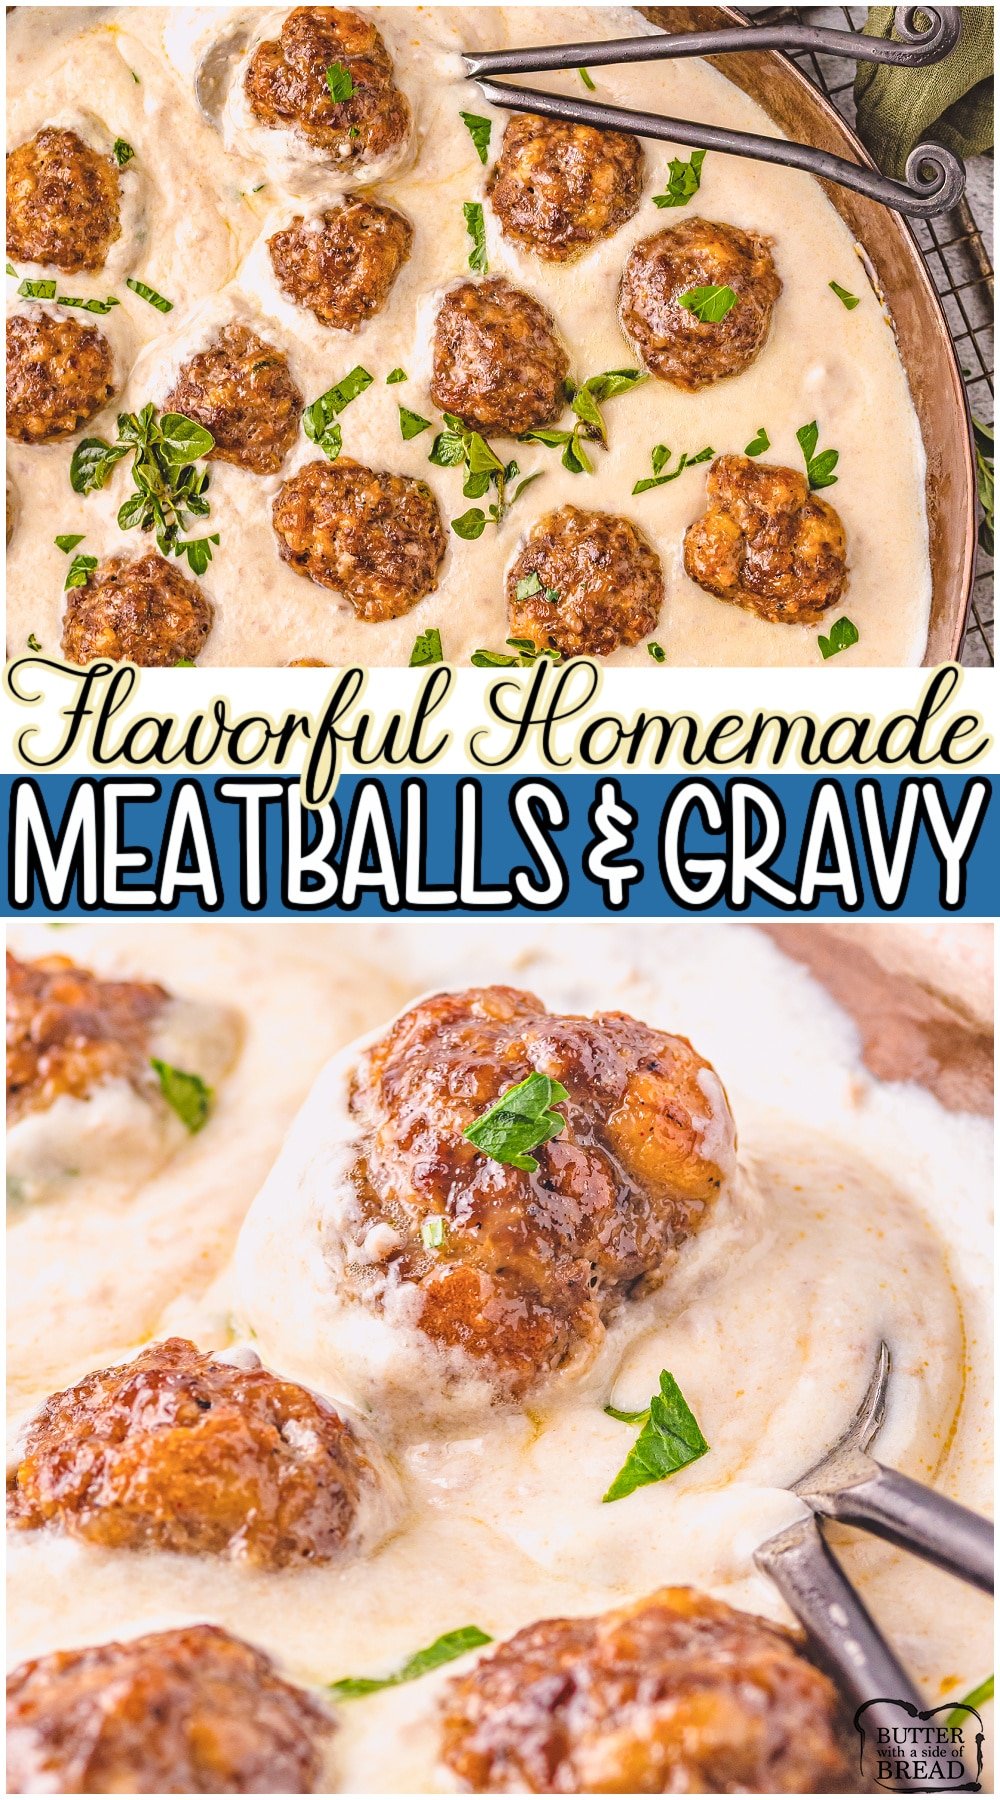 Flavorful homemade Meatballs and gravy made with beef, sausage & a blend of savory seasonings, all cooked in a creamy gravy! Perfect weeknight dinner served over mashed potatoes! #beef #sausage #meatballs #gravy #dinner #easyrecipe from BUTTER WITH A SIDE OF BREAD